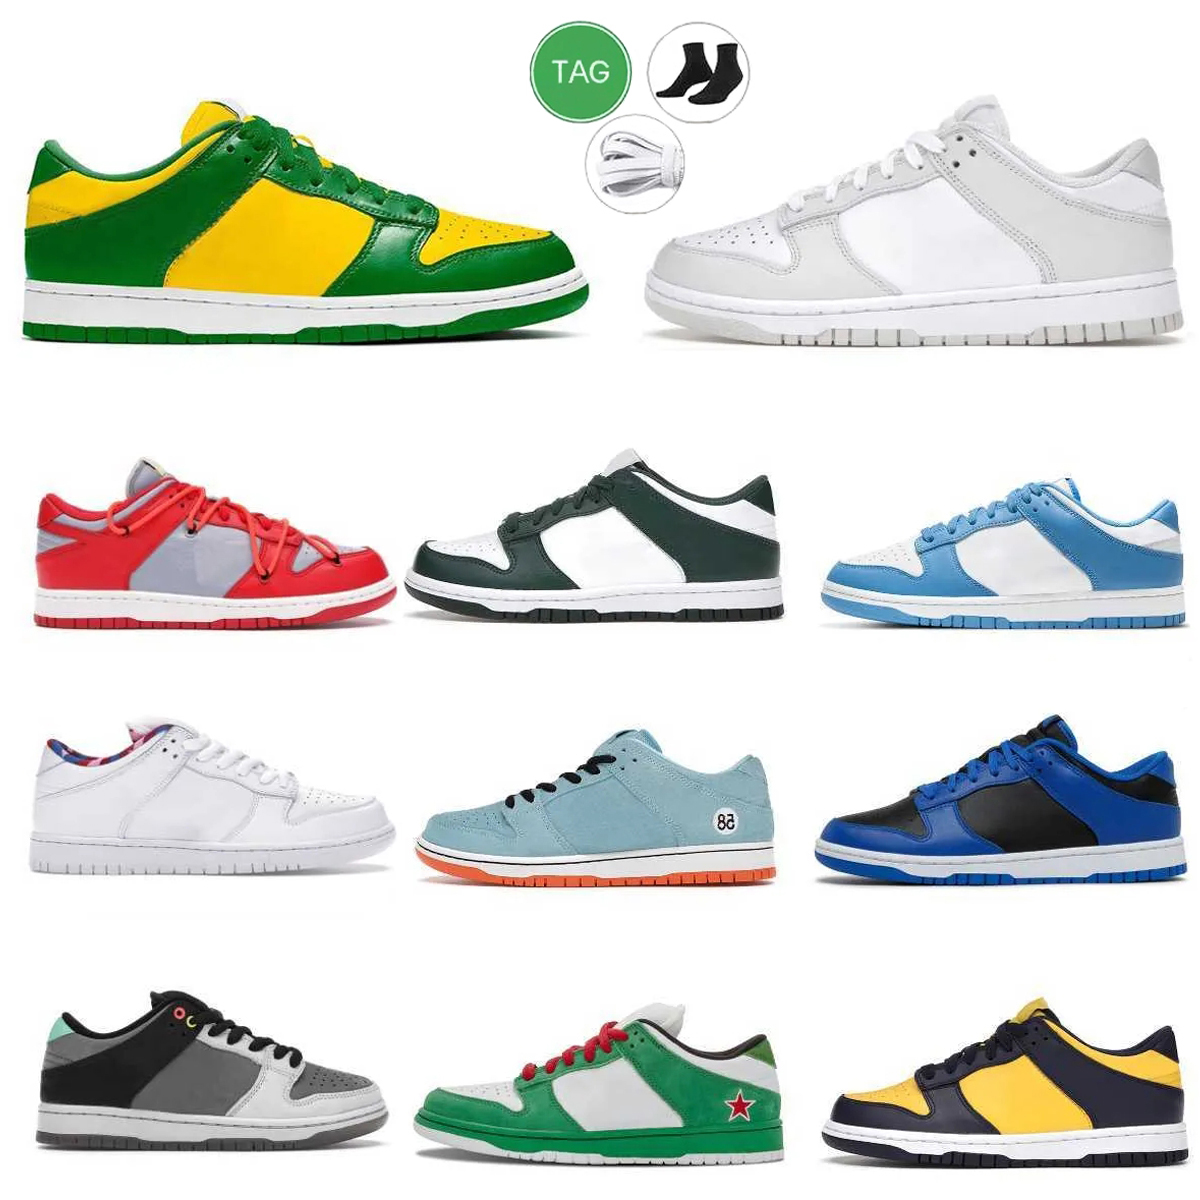 

Designers SB Lows Running Shoes DuNkS Grey Fog Black White UNC University Red Women Men Atmos Elephant Lime Ice Barely Parra Abstract Art Green Bear Trainer Sneakers, # 36-45 ocean